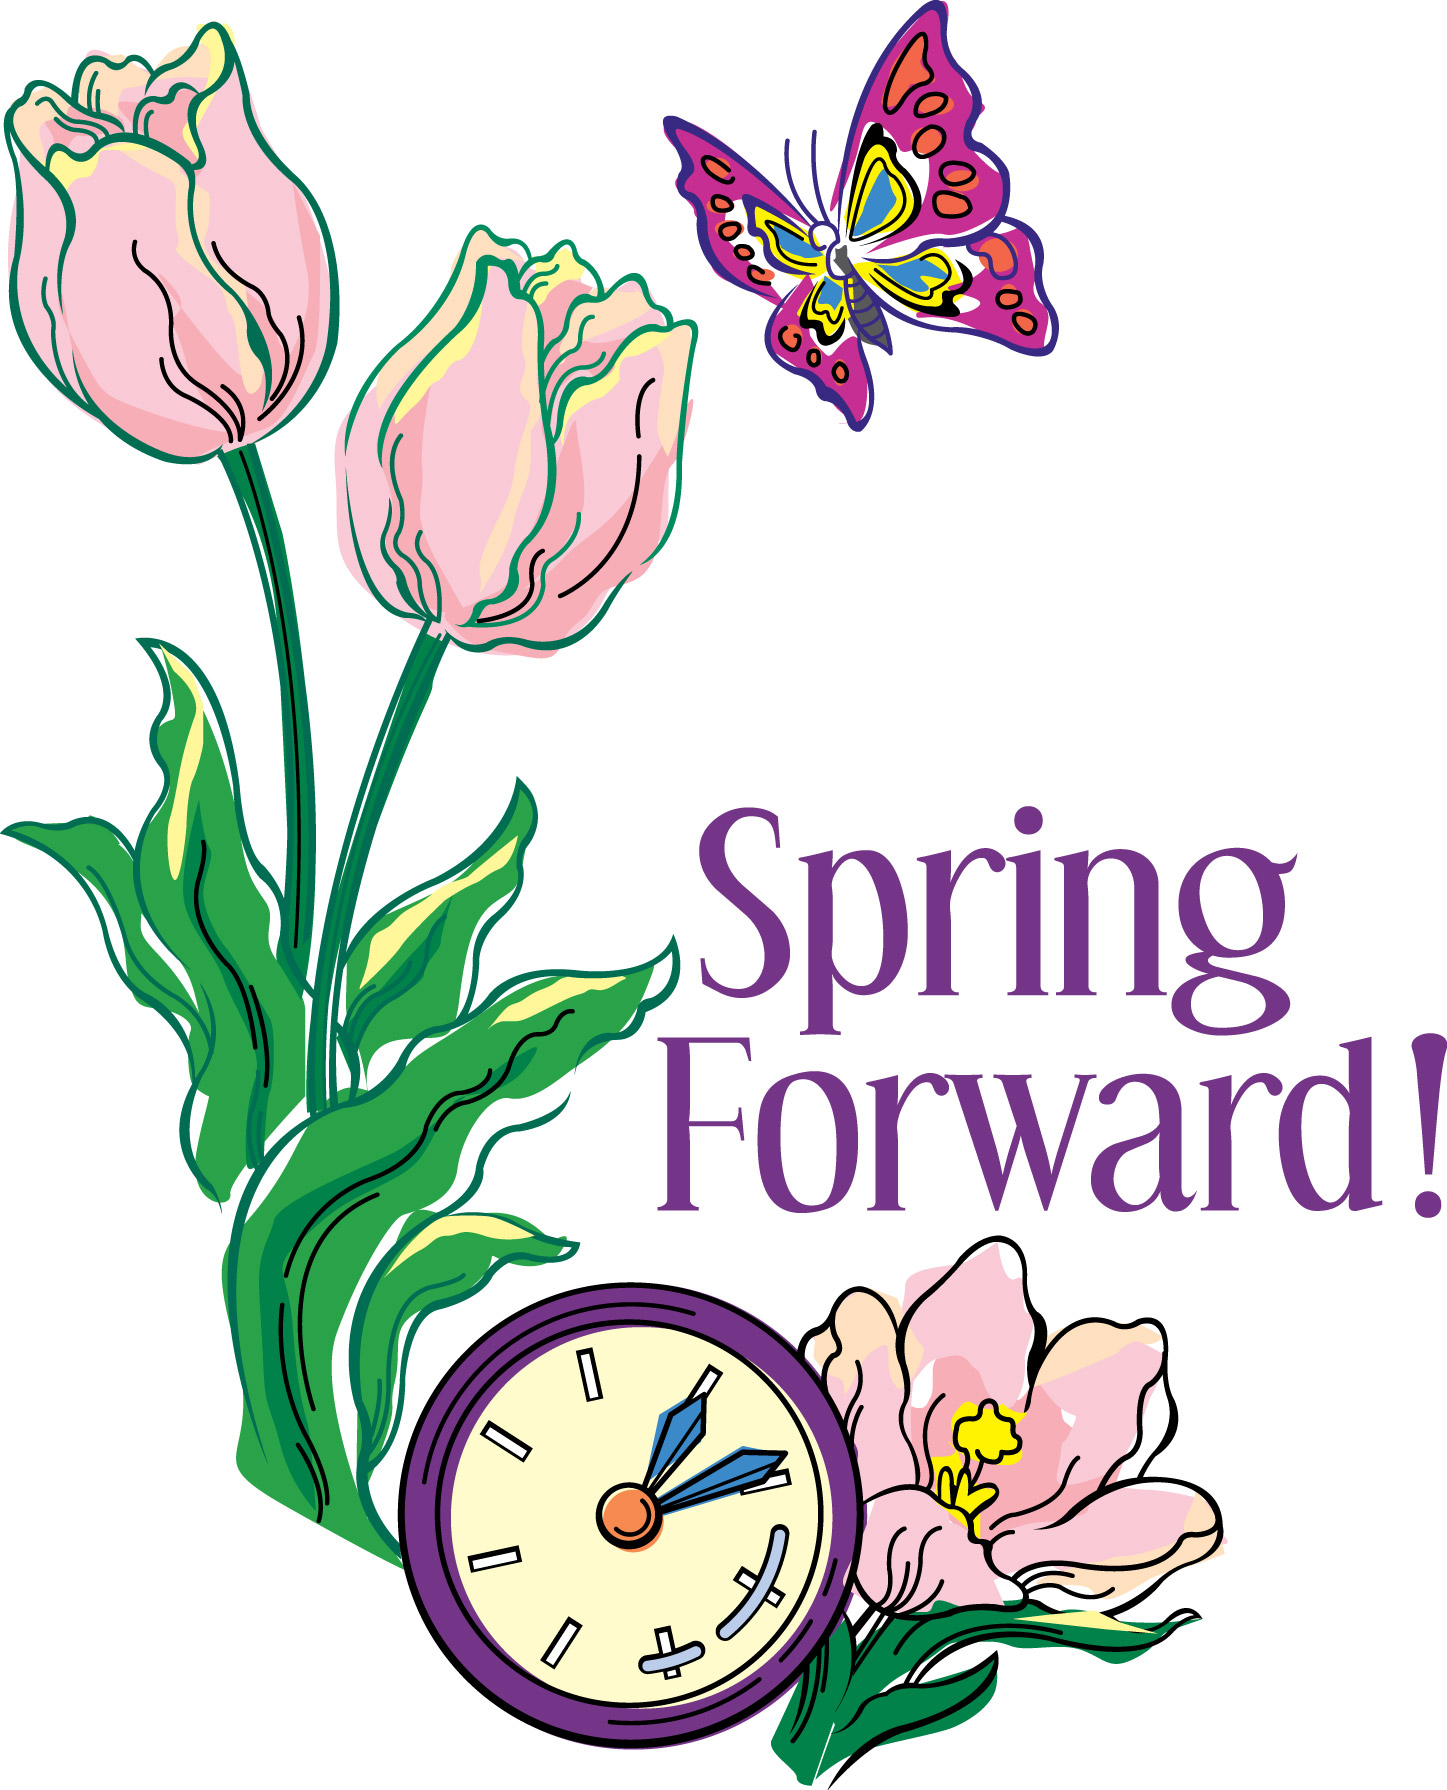 Spring Forward and Change Smoke and CO Detector Batteries The